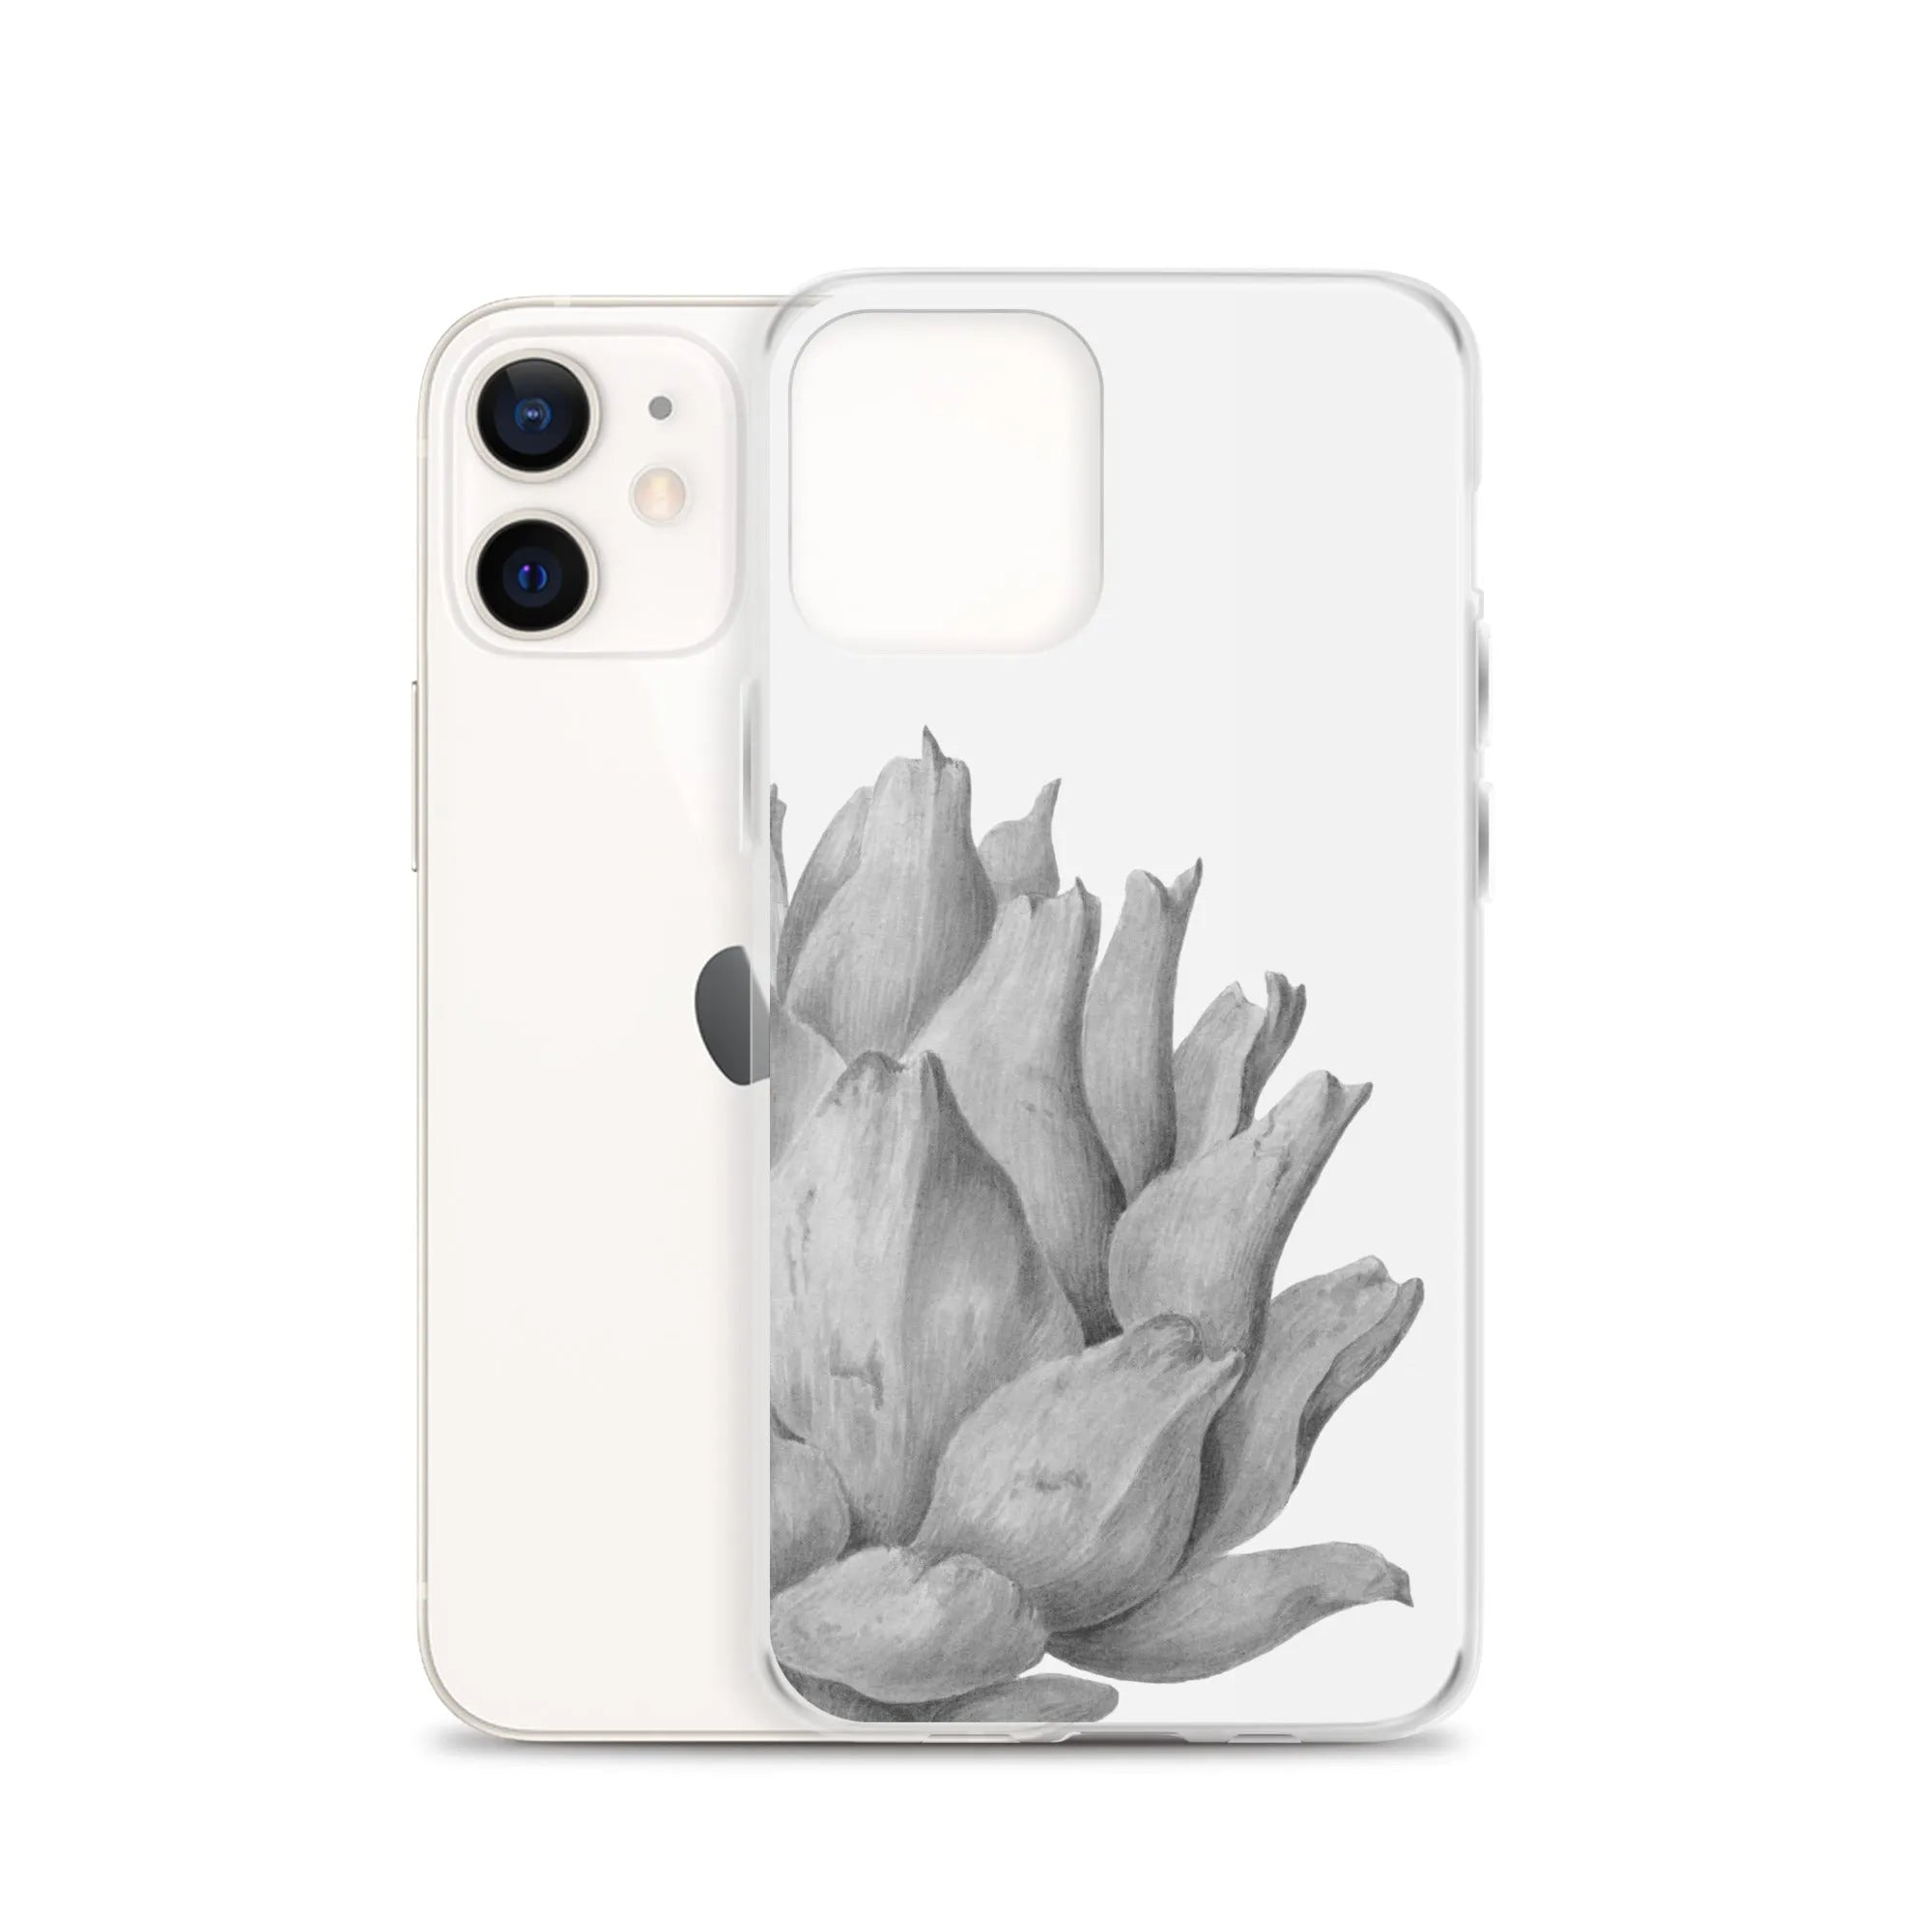 Heartichoke Botanical Art Iphone Case - Black And White - Iphone 12 - Mobile Phone Cases - Aesthetic Art